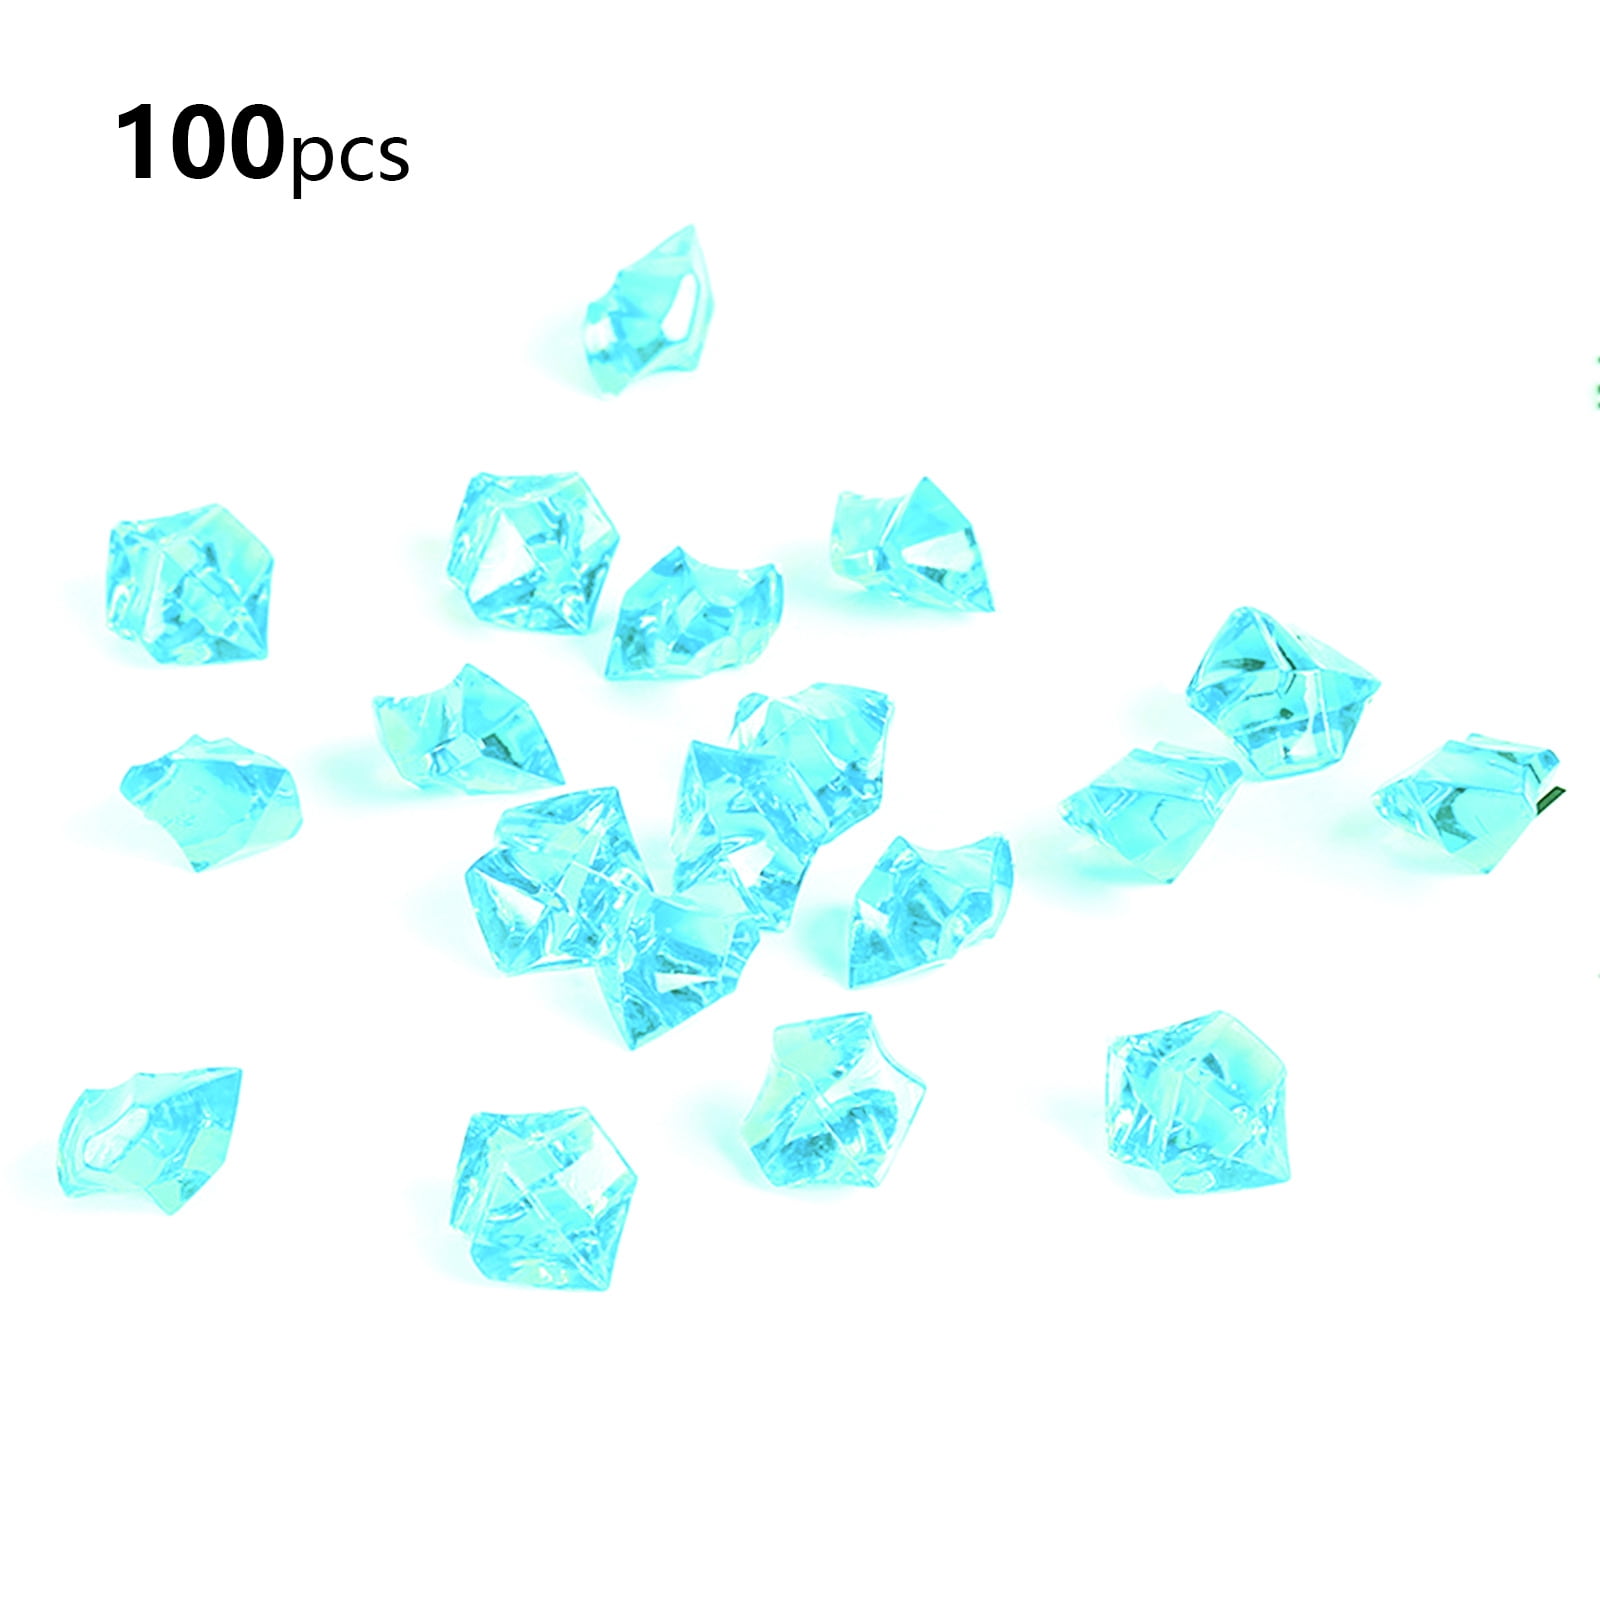 100PCS DIY Clear Fake Crushed Ice Rocks Ice Cubes Acrylic Crystals Vase Fillers 